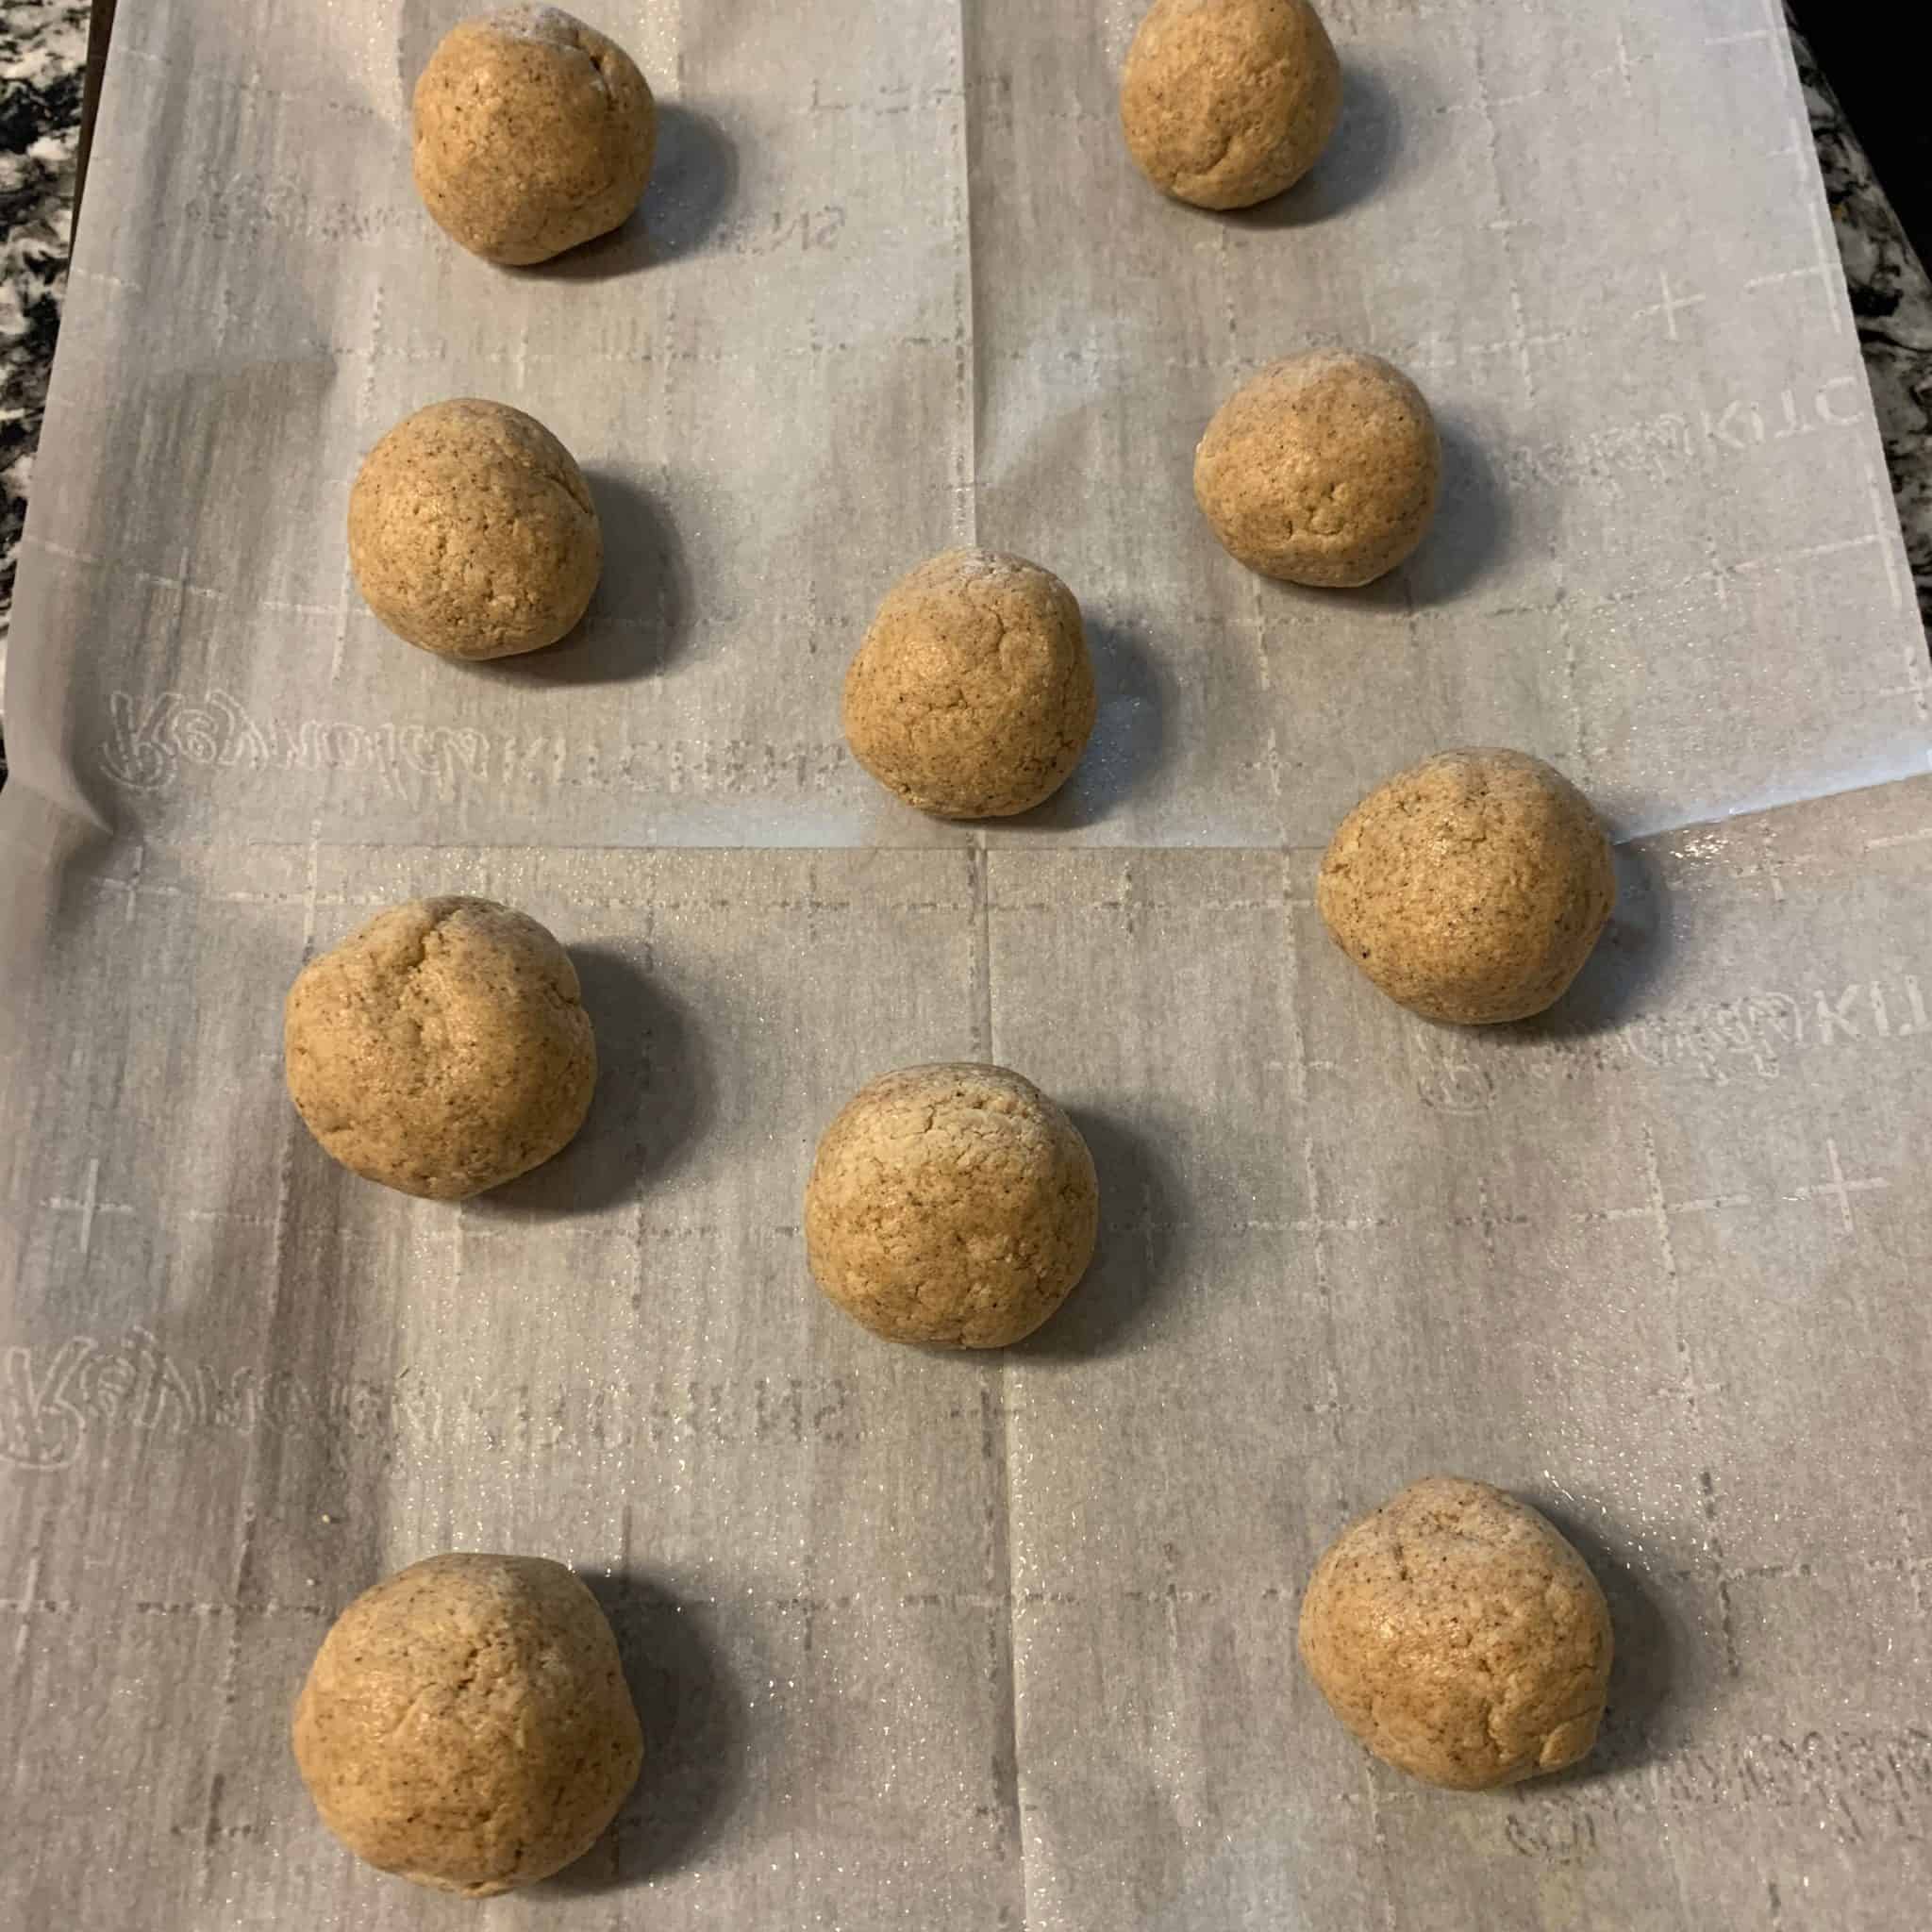 gingerbread protein balls before baking on the baking sheet